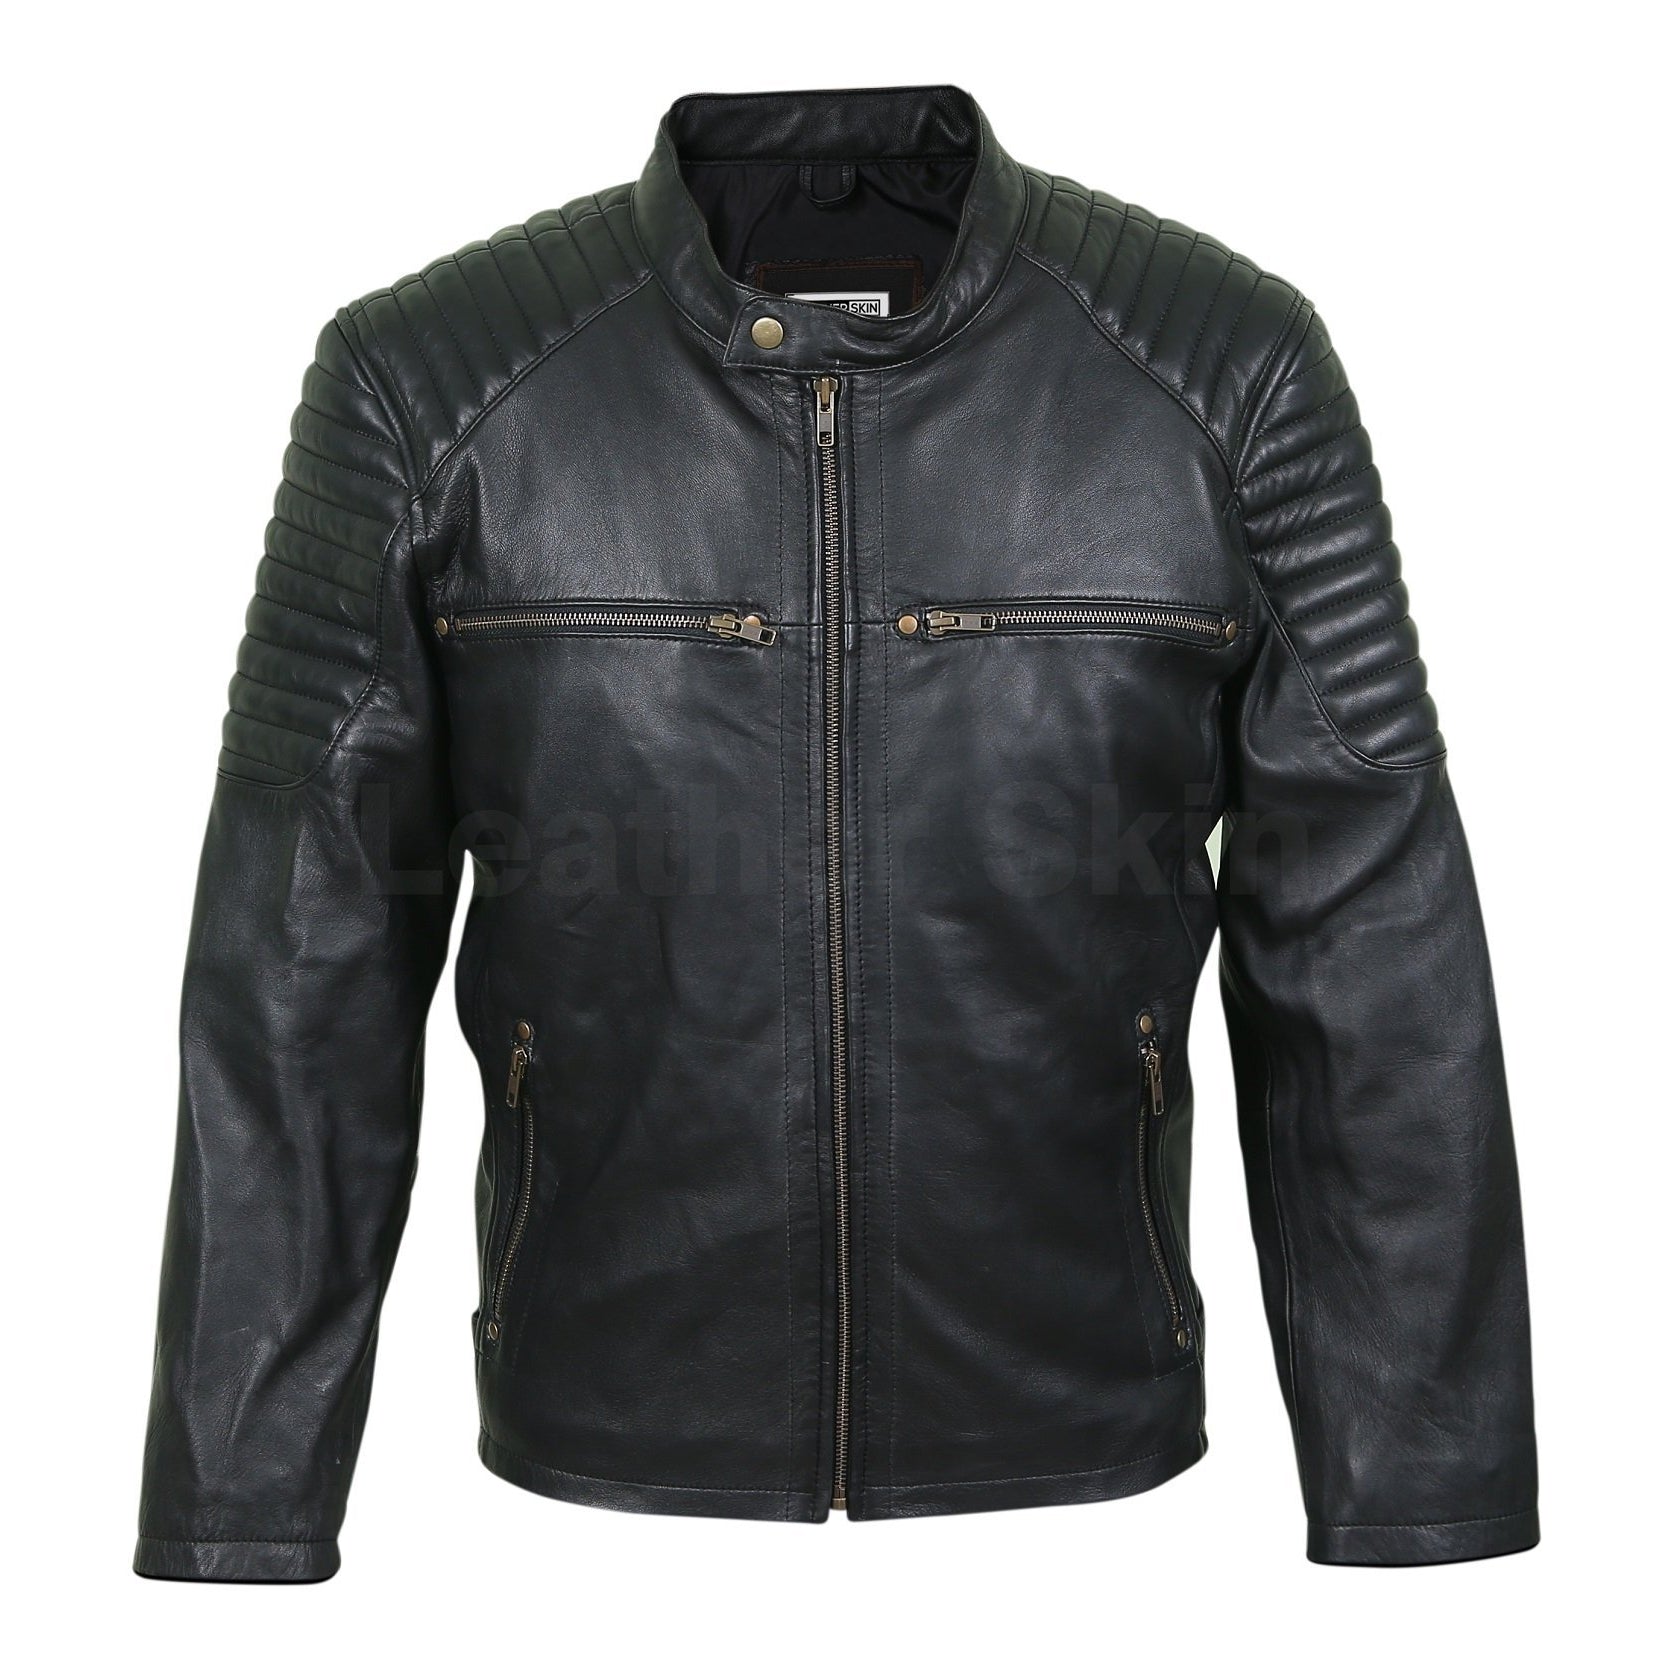 Men Antique Zippers Black Leather Jacket with Padded Shoulders ...